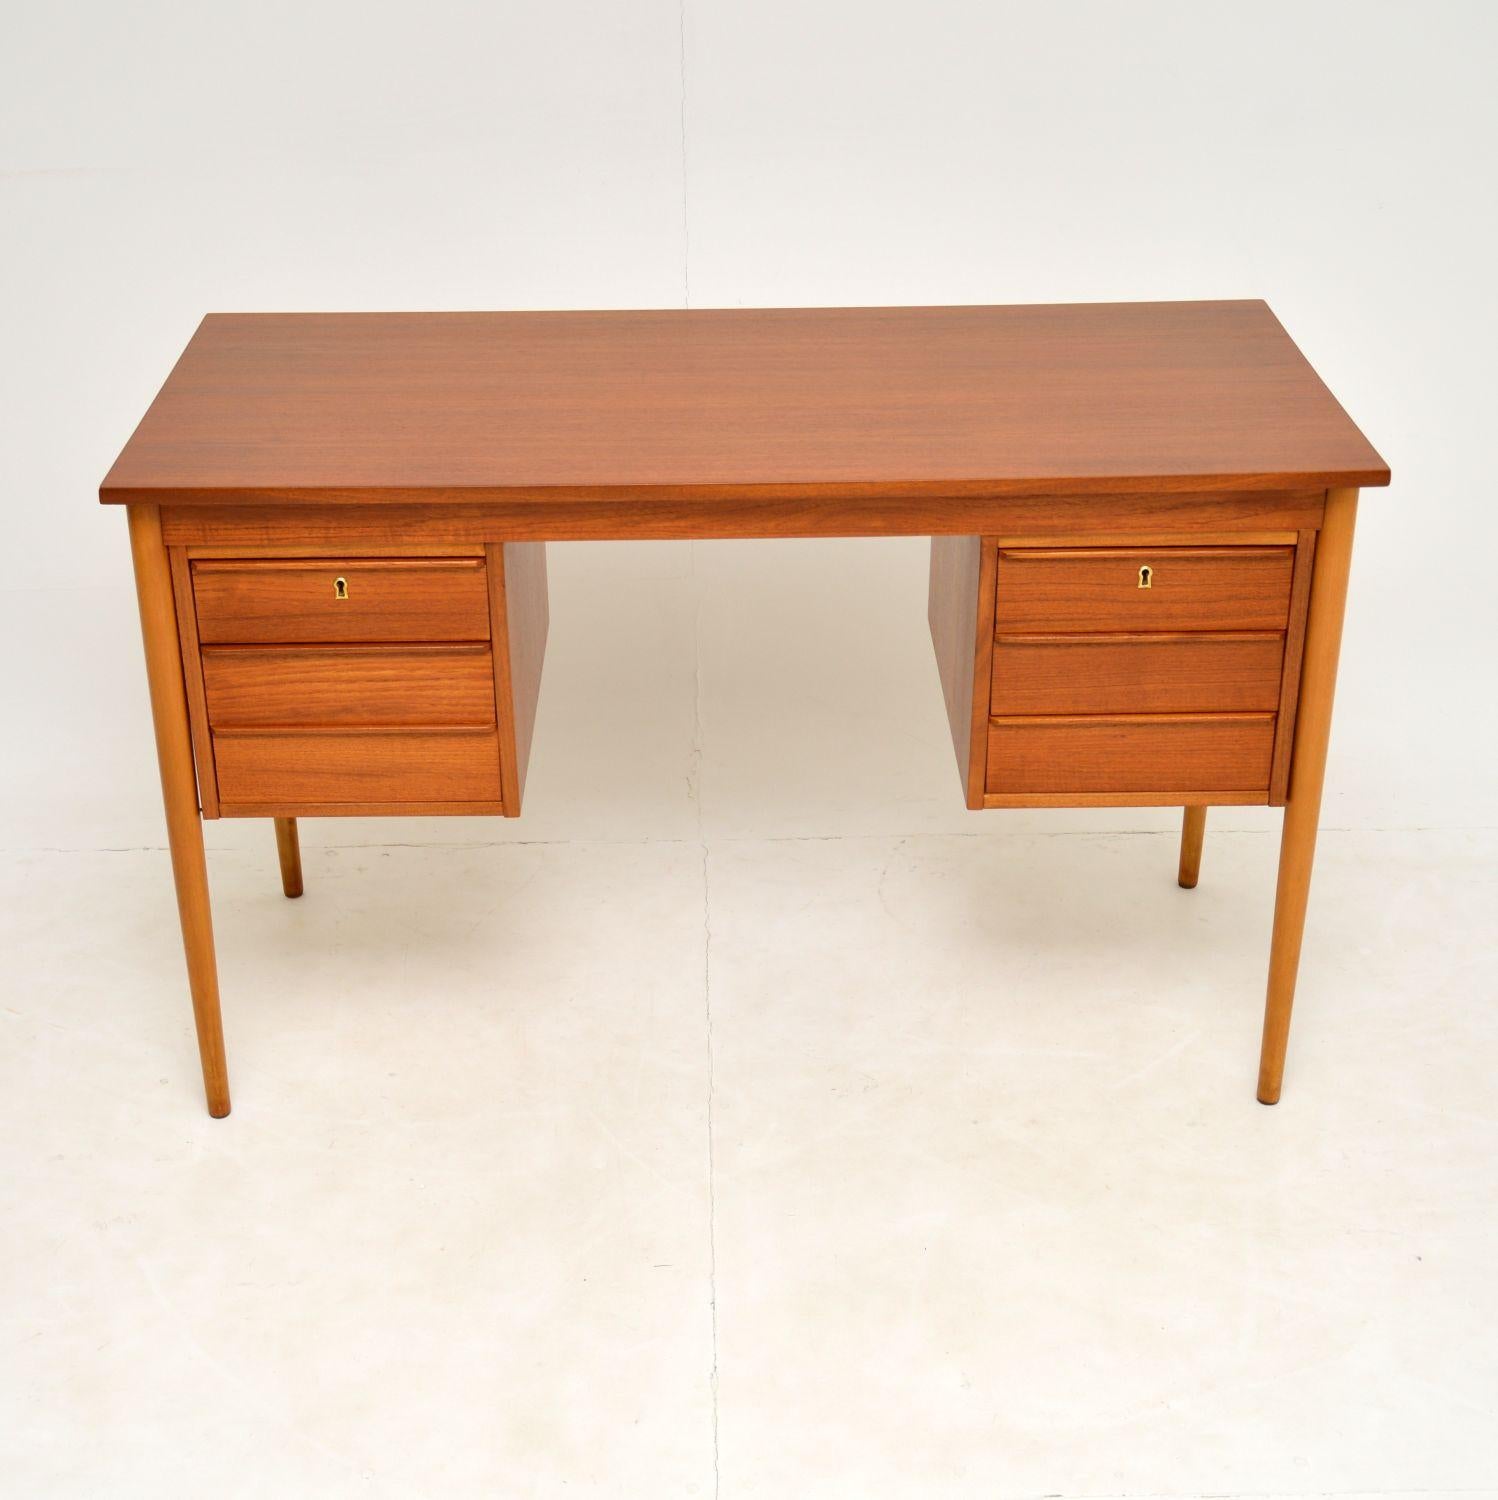 A stylish and practical vintage desk in teak, this was made in Denmark and dates from the 1960’s.

It is very well made, with a beautiful and minimal design. There is a locking key that comes with this for the two top drawers. This is also nicely